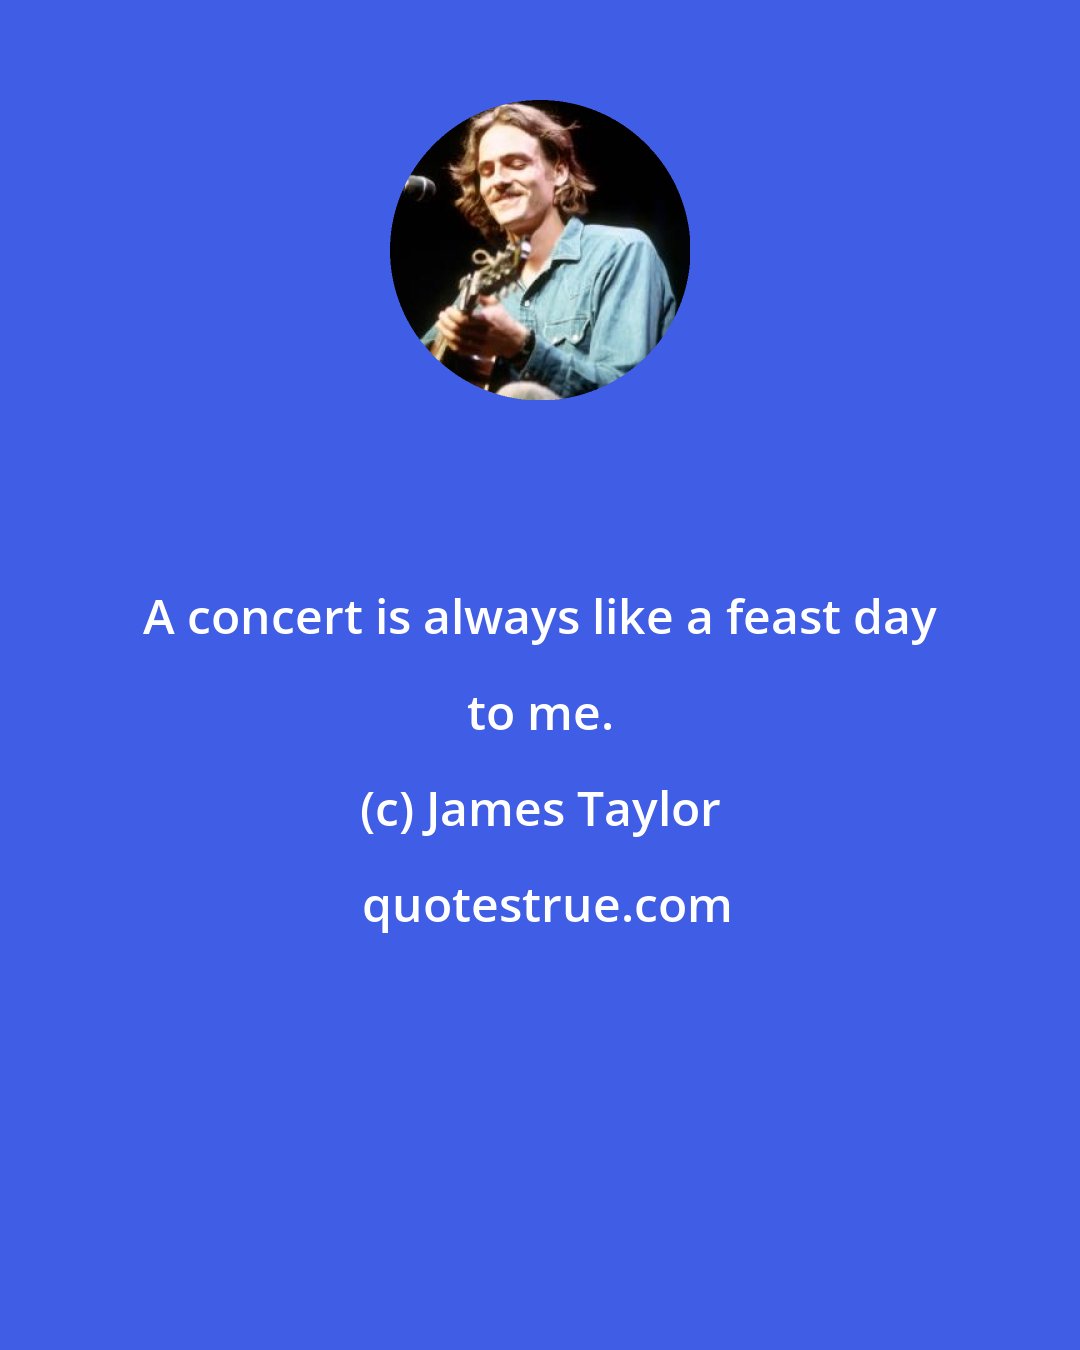 James Taylor: A concert is always like a feast day to me.